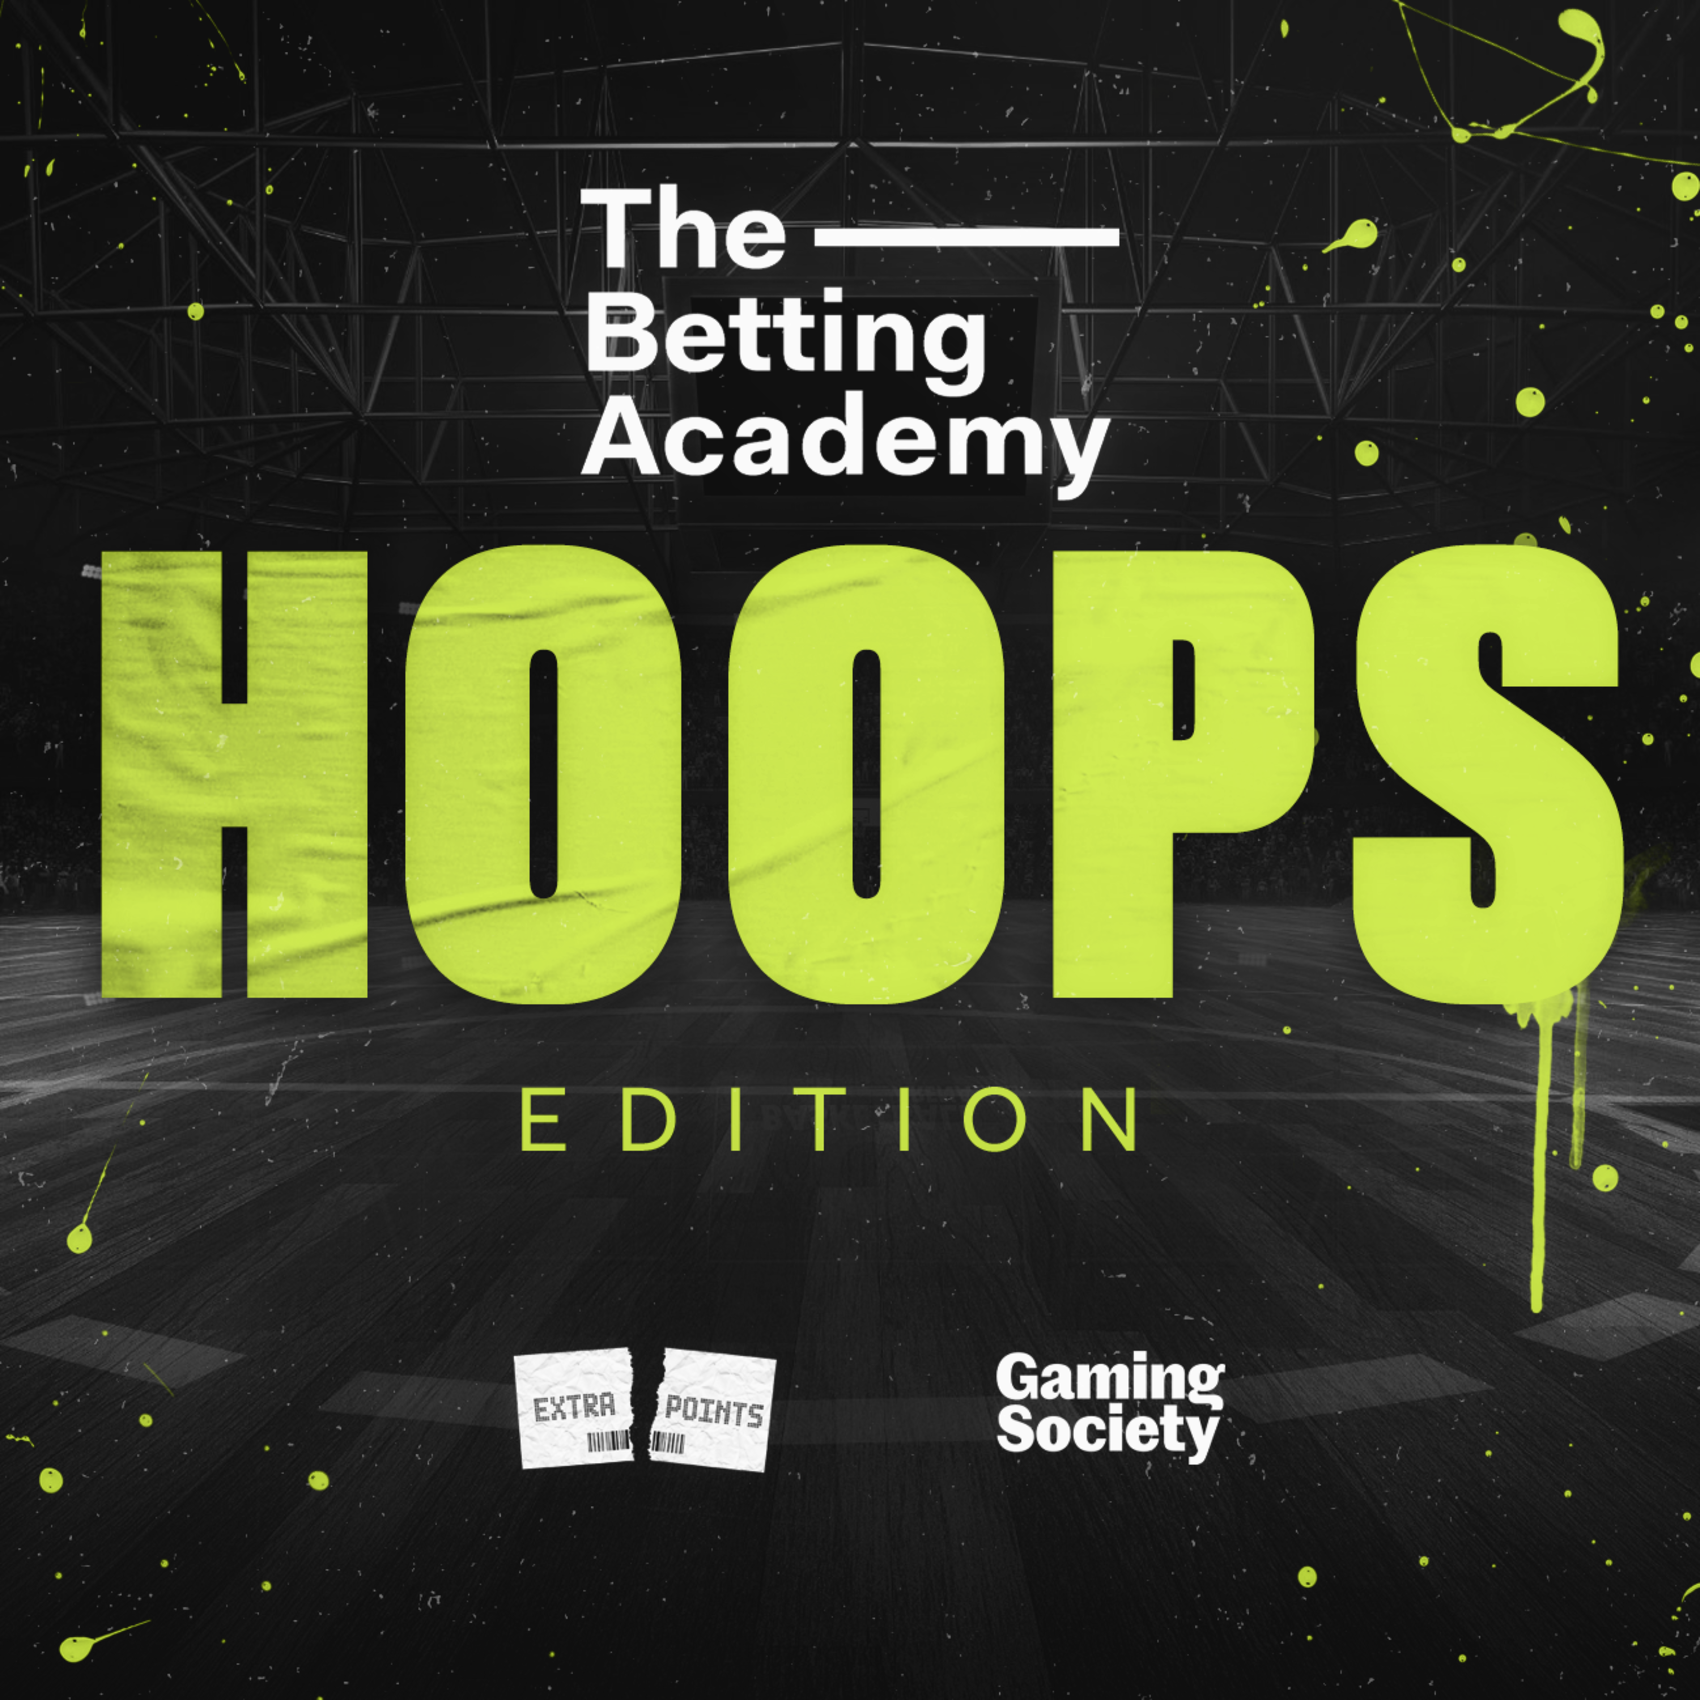 Sports betting academy horse betting odds and payouts for horse